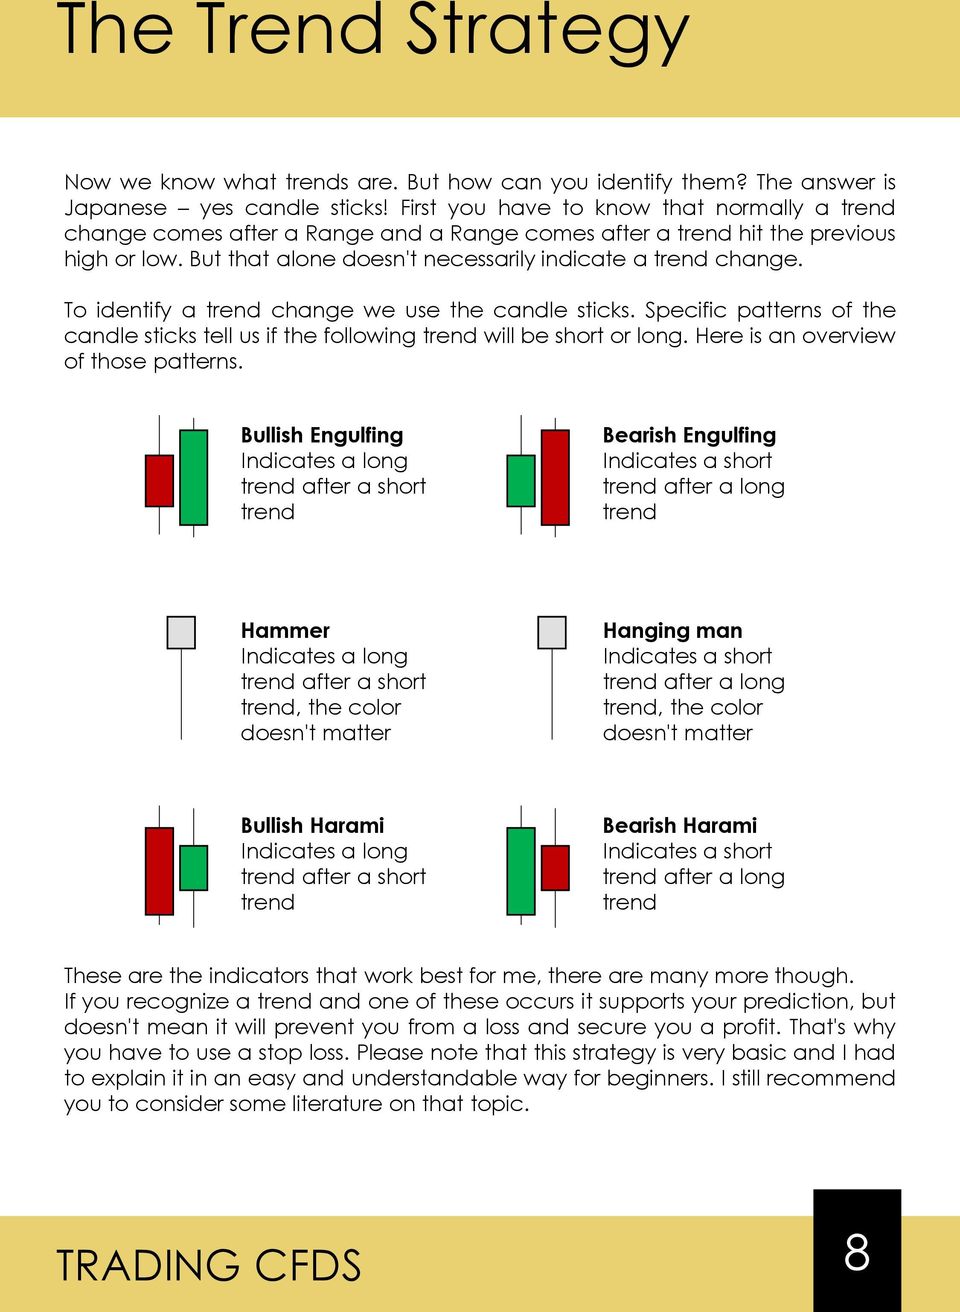 To identify a trend change we use the candle sticks. Specific patterns of the candle sticks tell us if the following trend will be short or long. Here is an overview of those patterns.